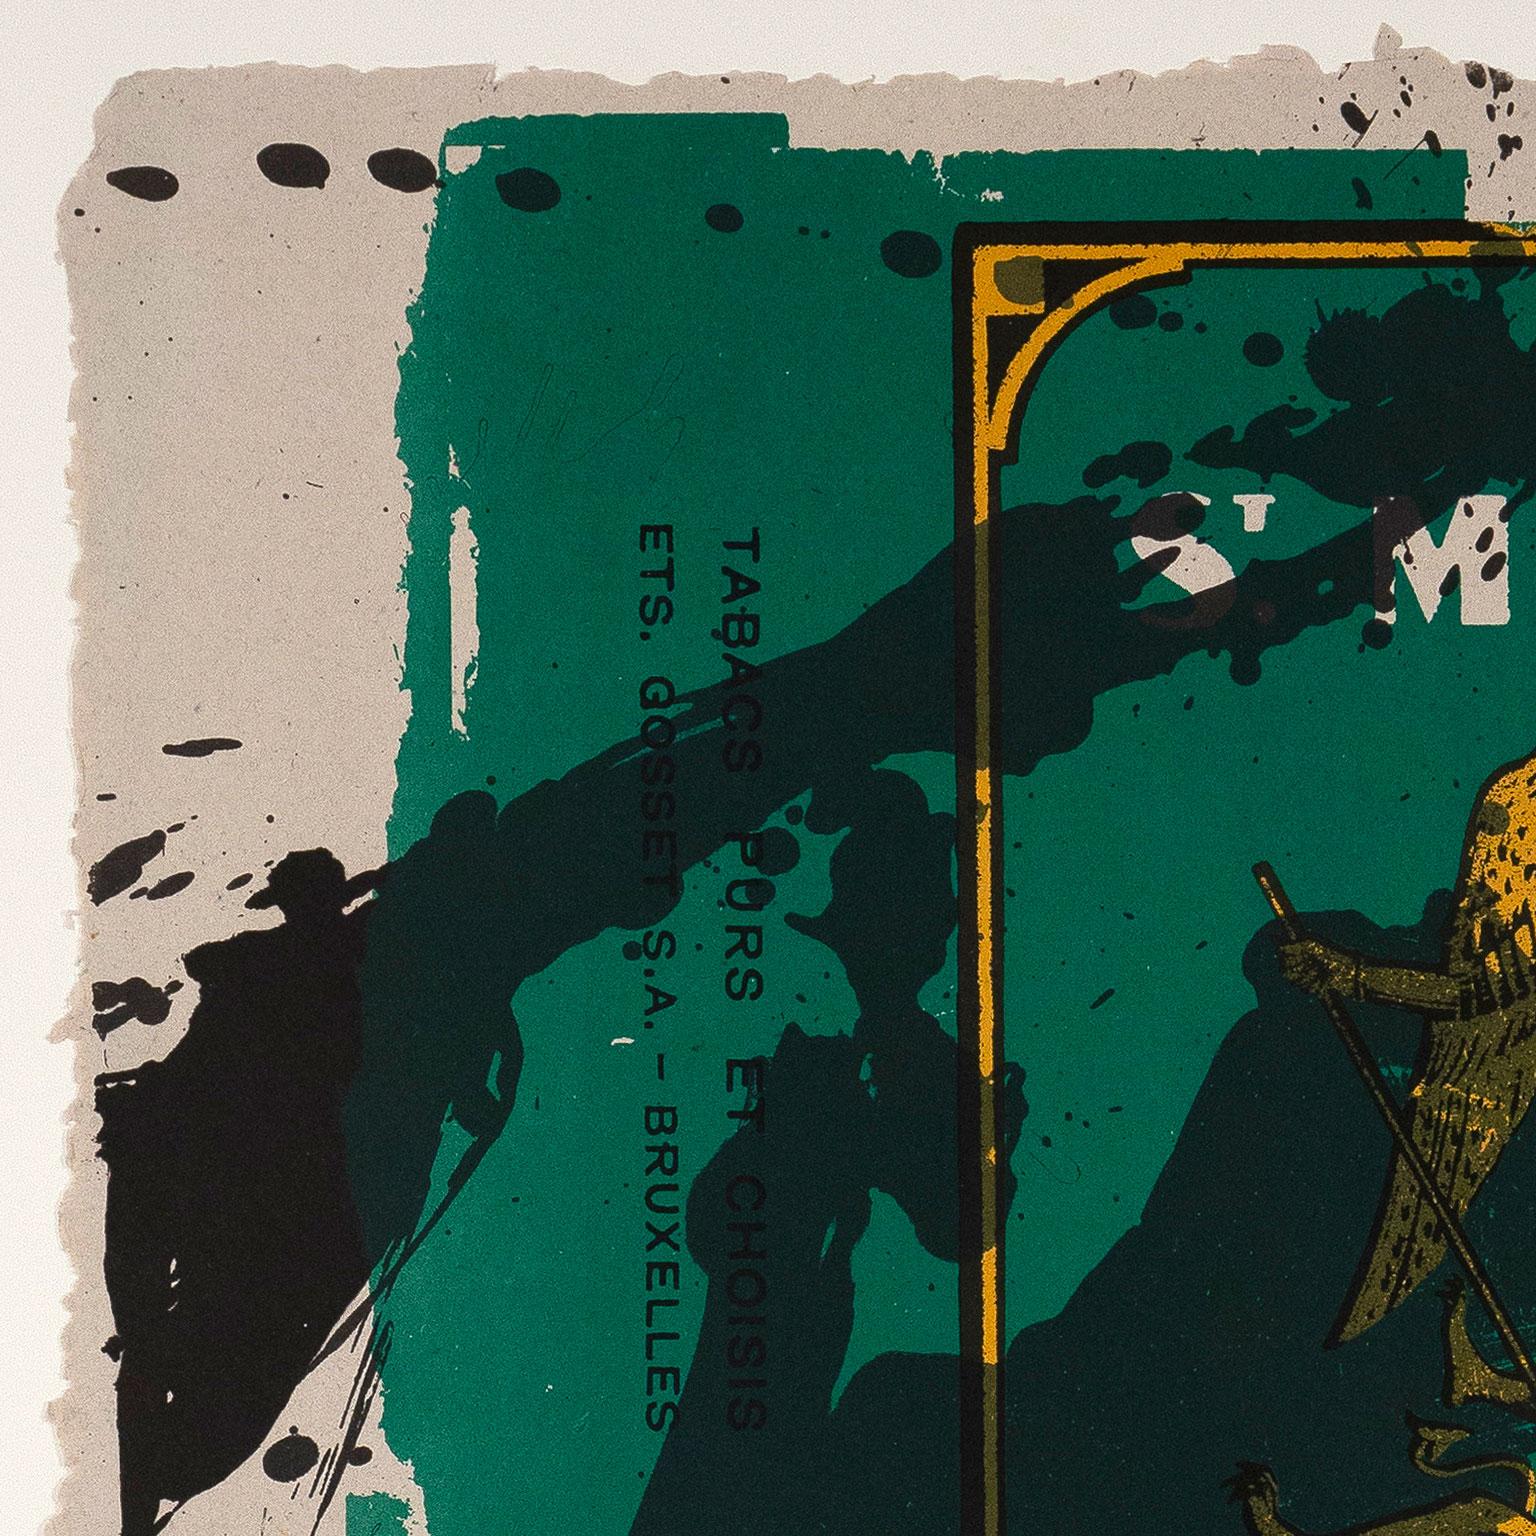 St. Michael III - Abstract Print by Robert Motherwell